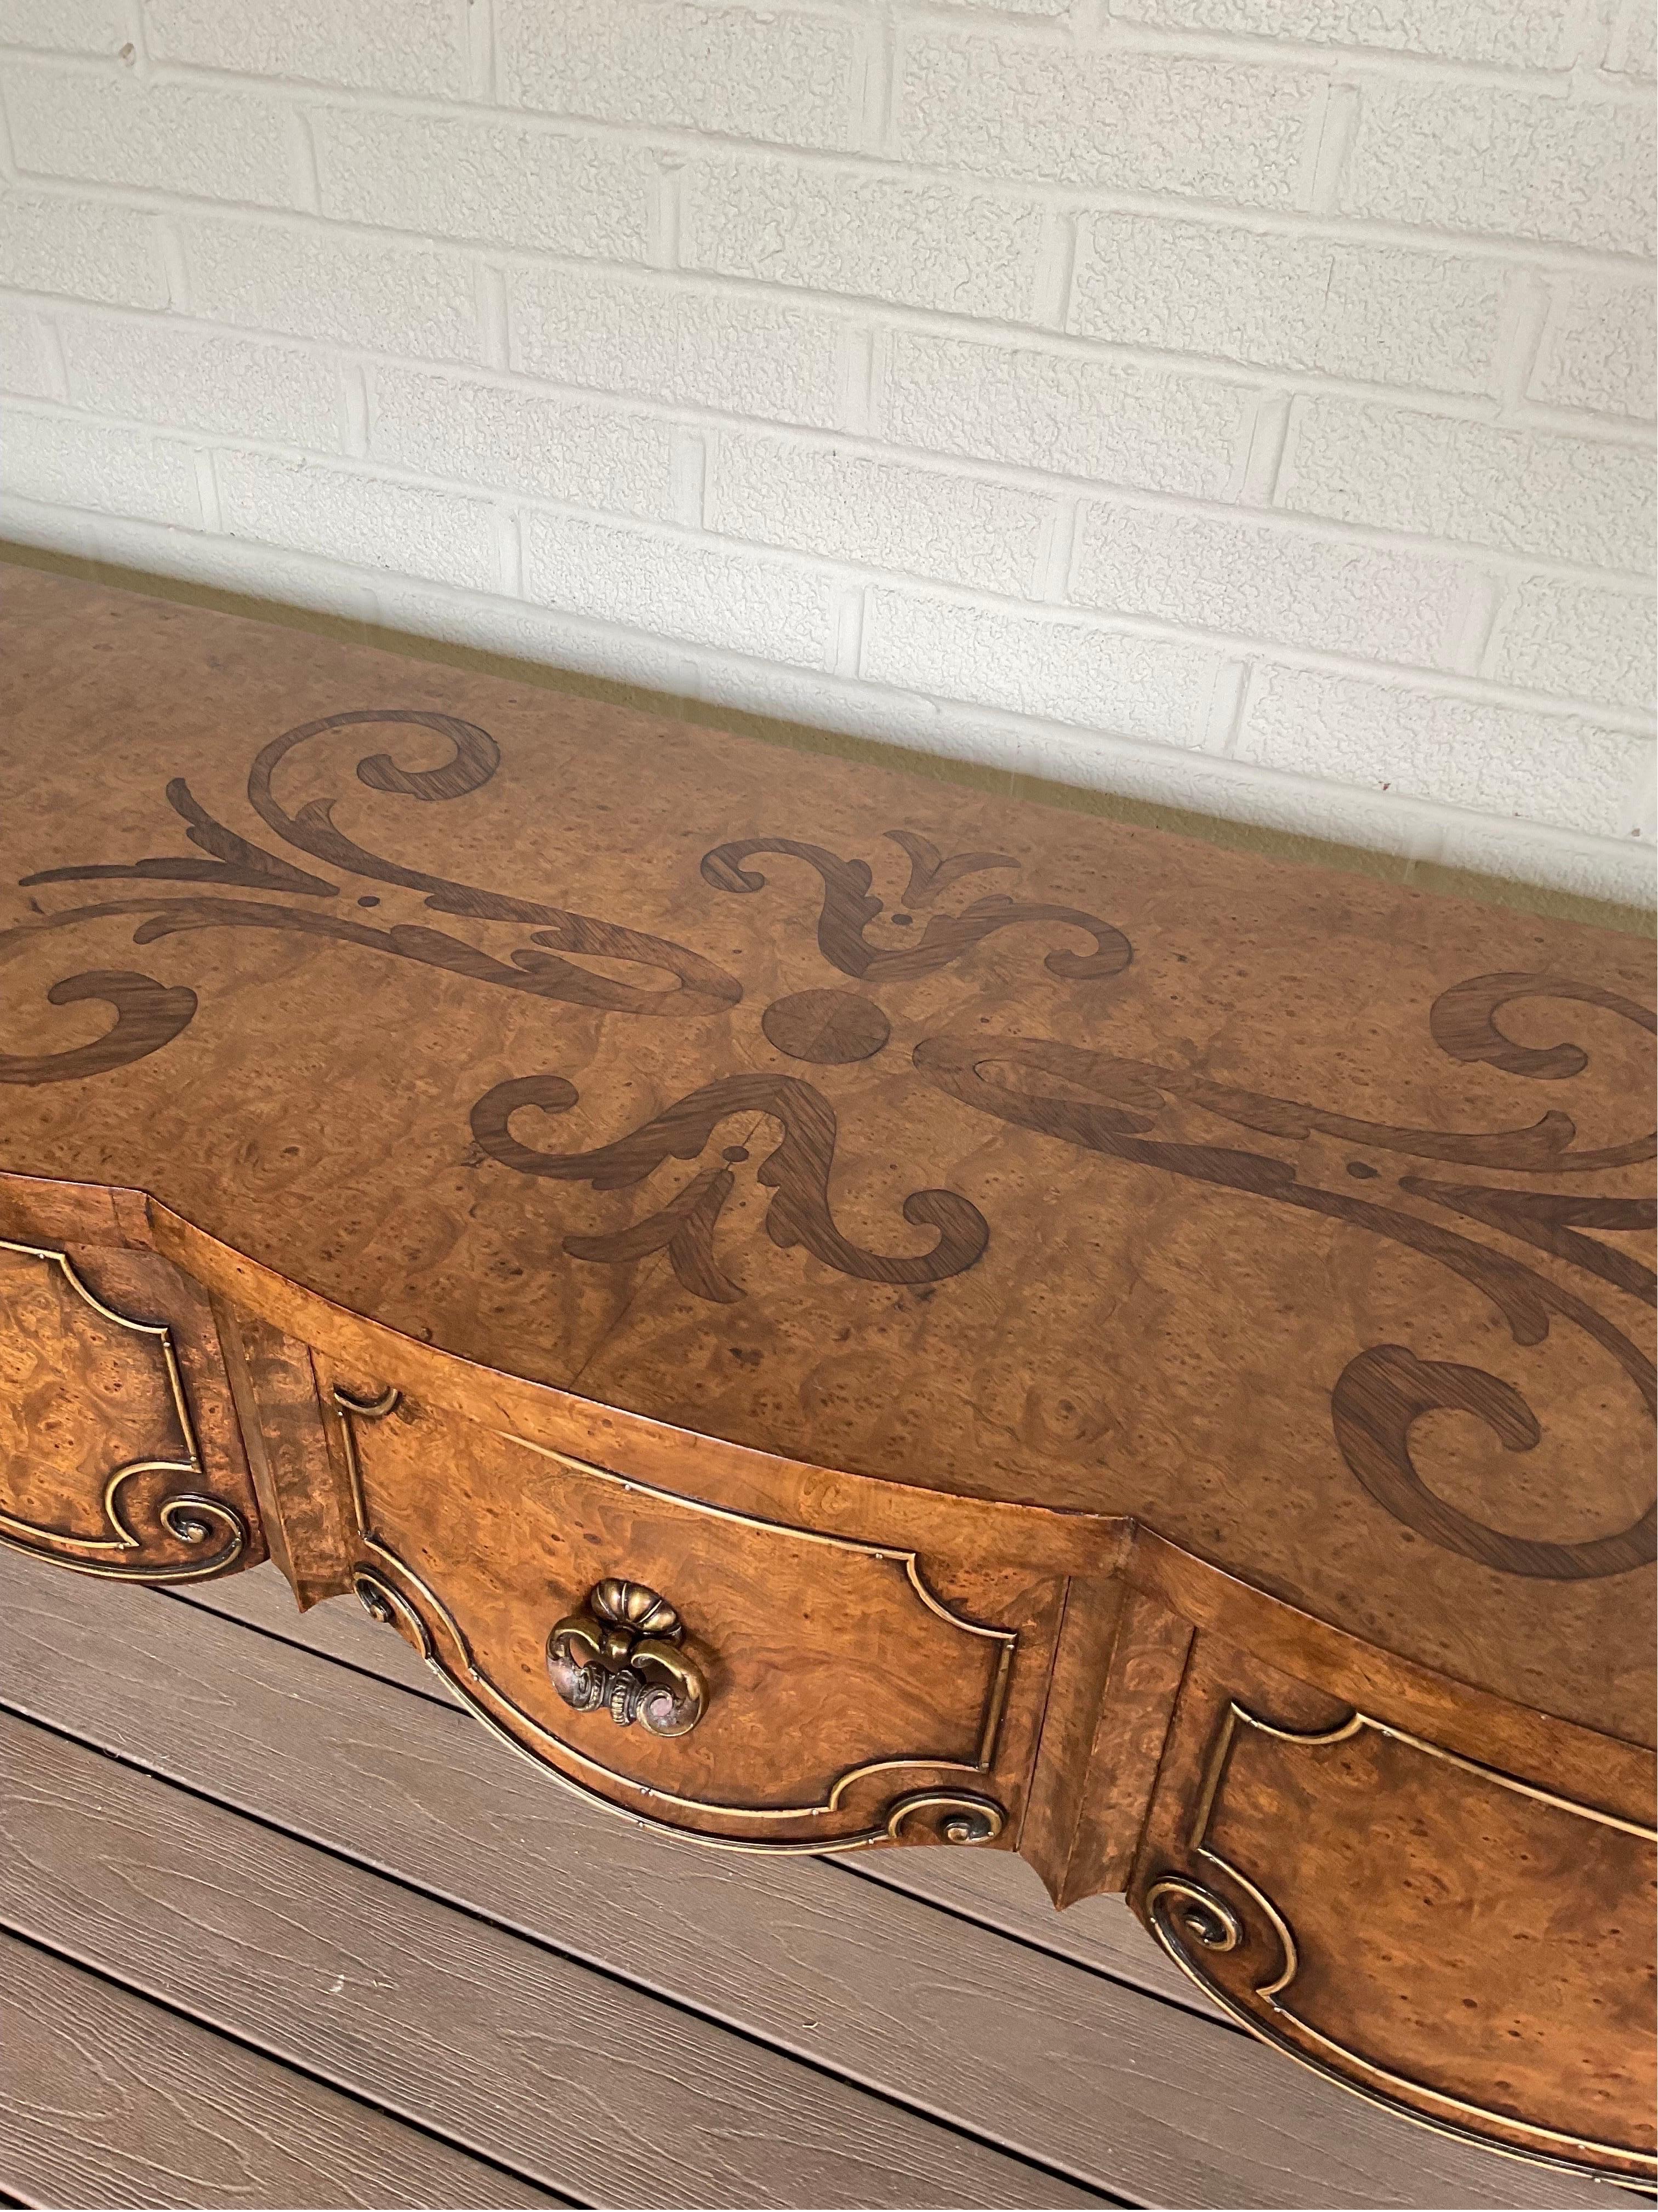 Extremely Rare Mastercraft Console Table. This one owner beauty had an original cost of over $27,000 in the 1970’s. It’s Massive and Magnificent. The marquetry on the top of the console is spectacular and in incredible condition. Don’t miss this